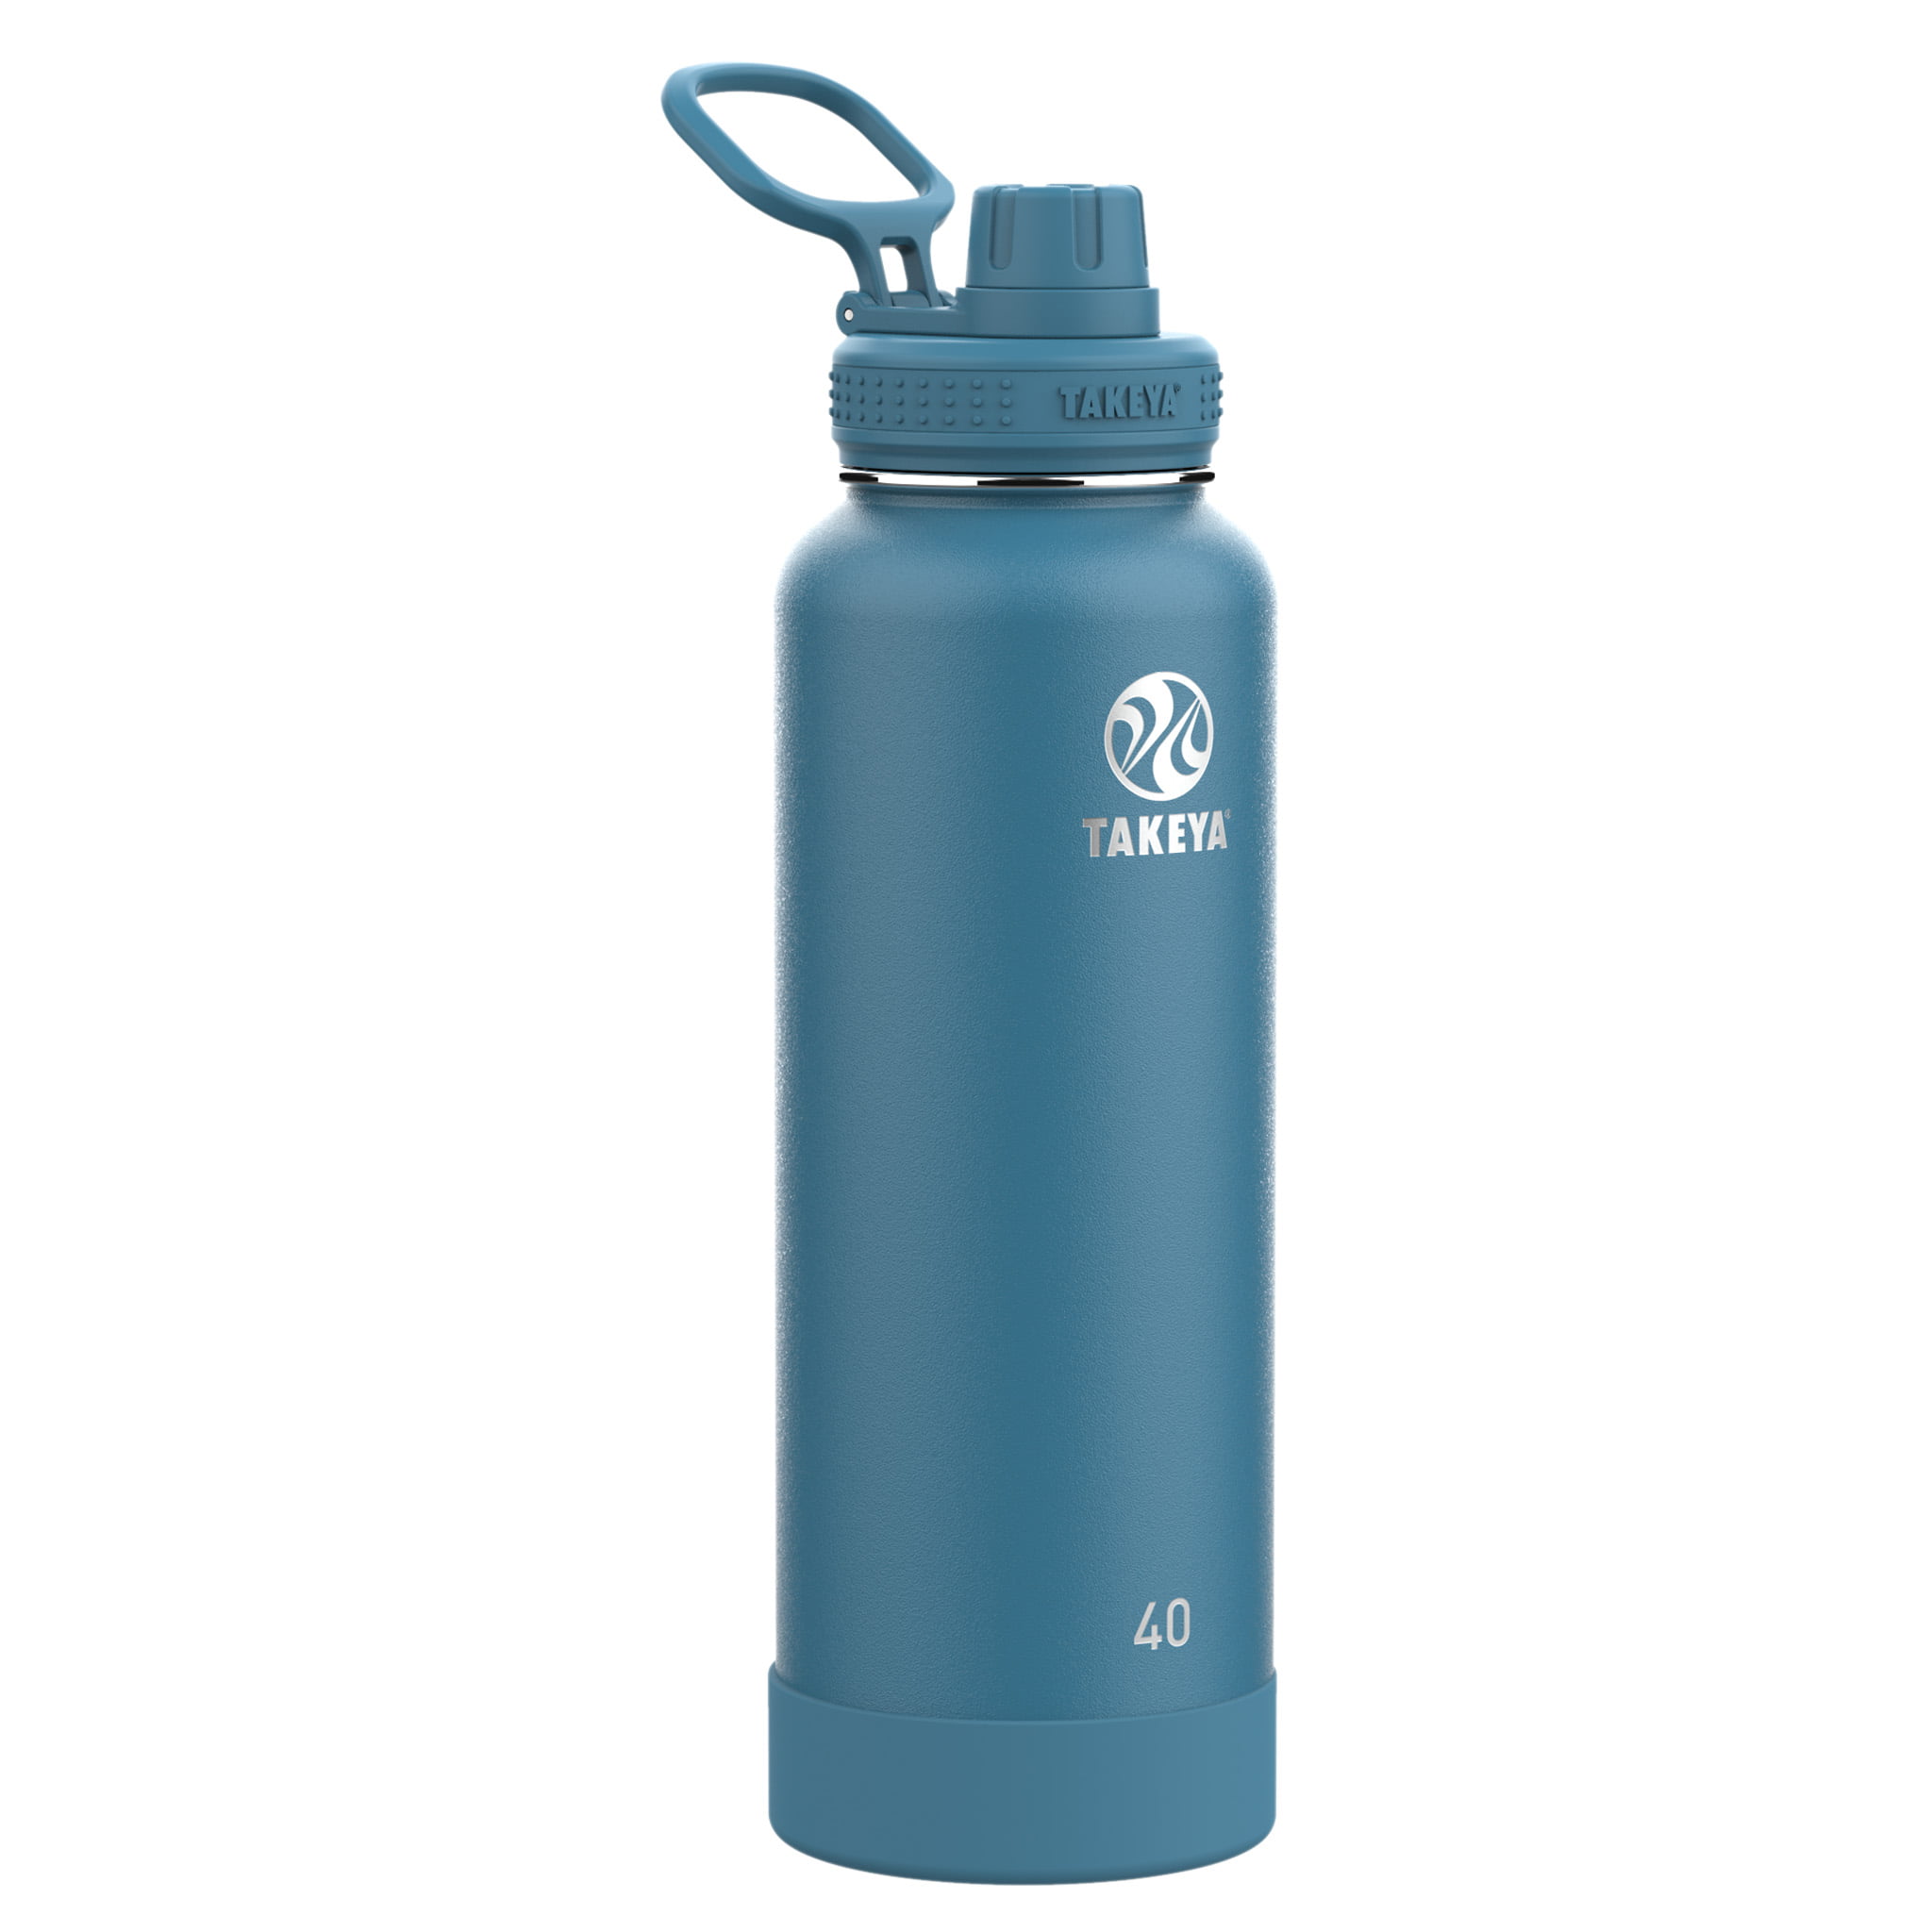 Takeya Actives 40 oz. Stainless Steel Straw Bottle Teal 52037